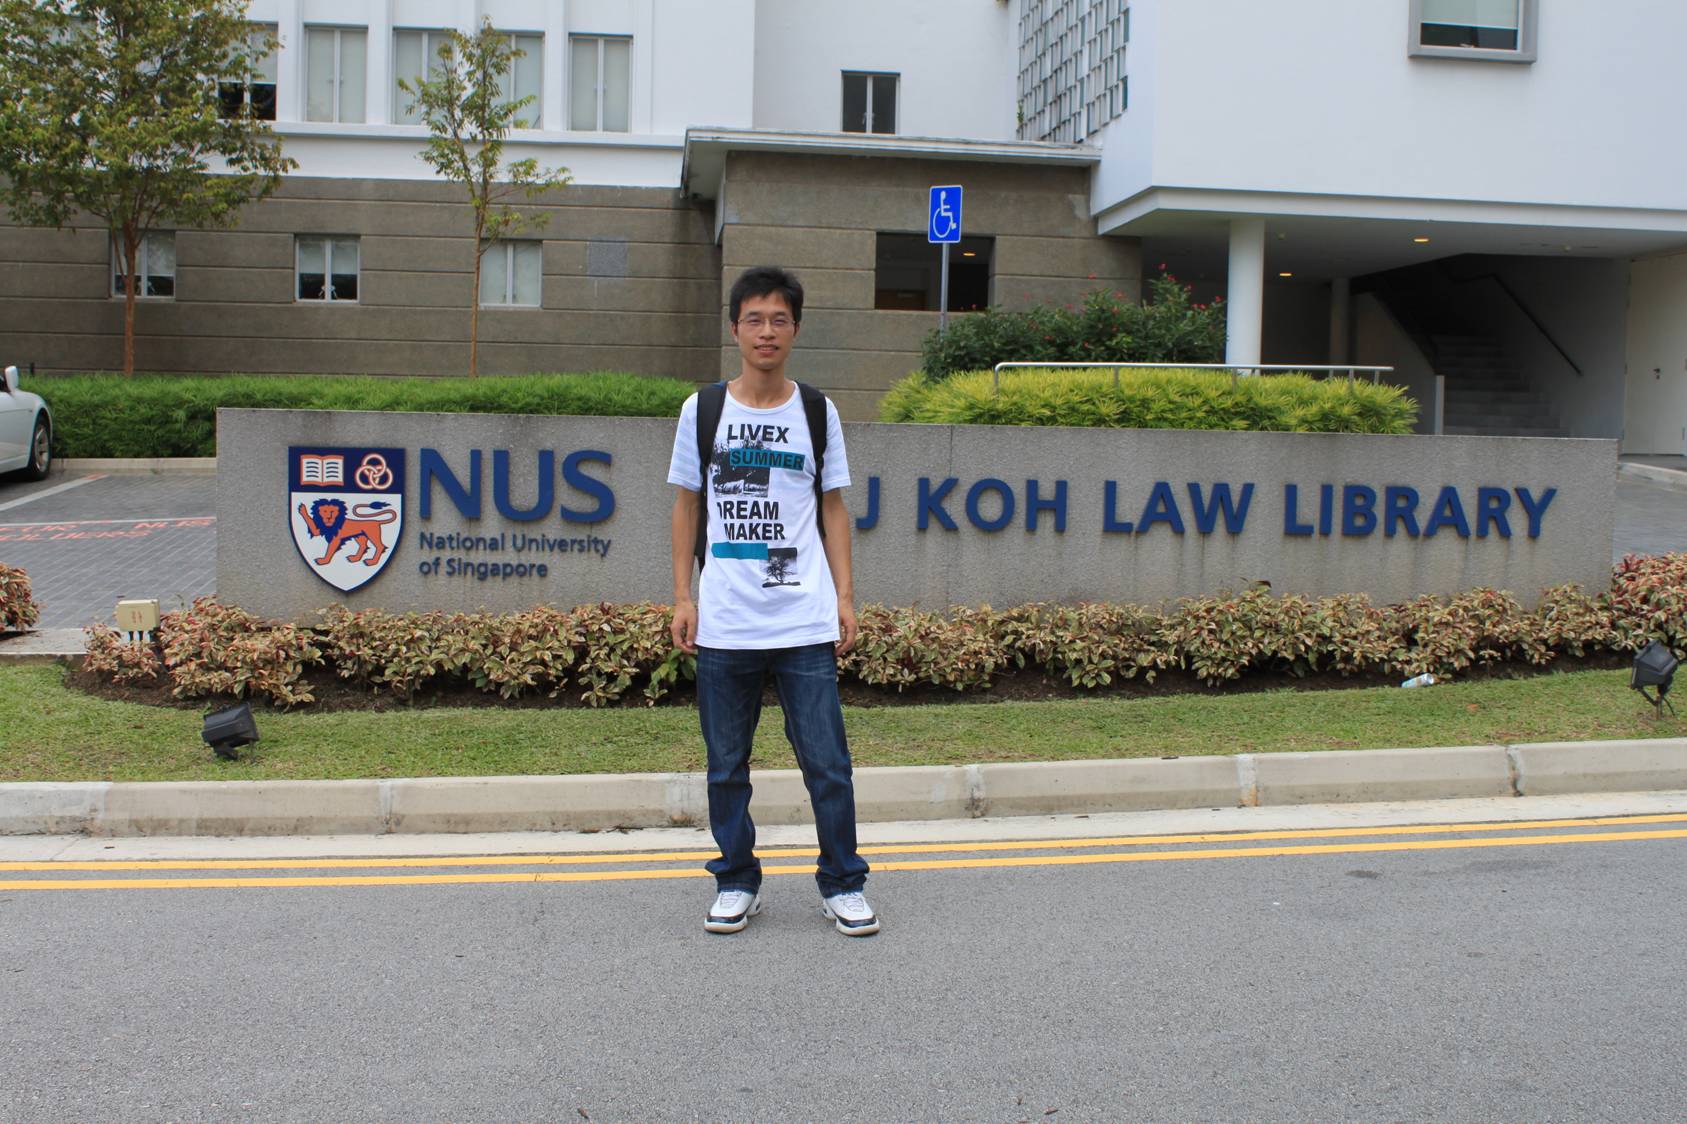 Picture: Landon in front of the law library at National University of Singapore